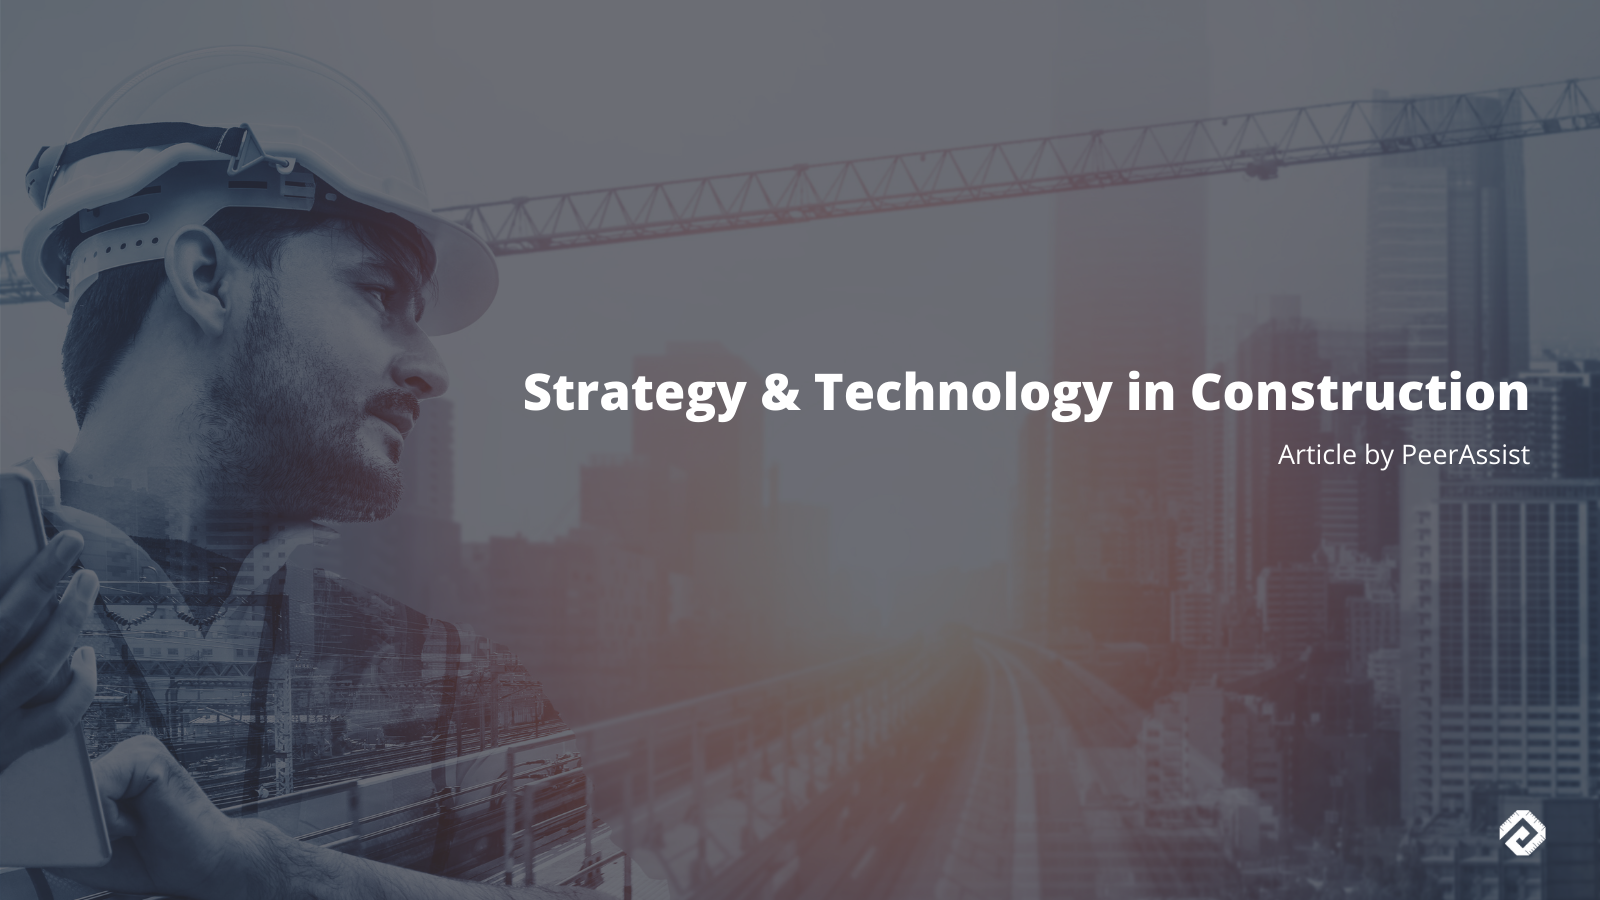 Strategy & Technology in Construction